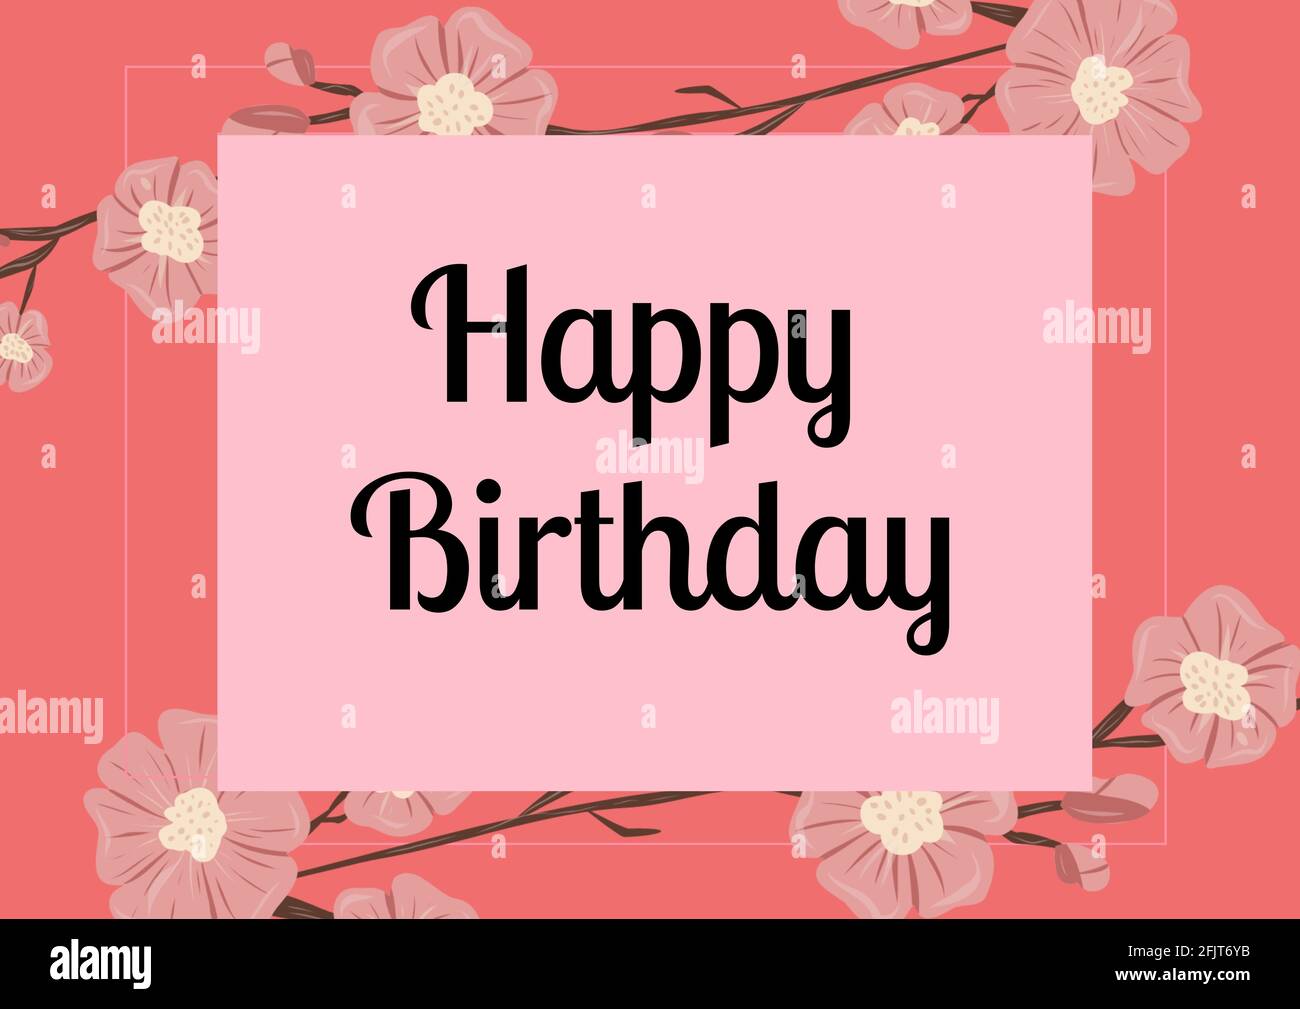 Happy birthday text over pink banner against floral design on orange background Stock Photo